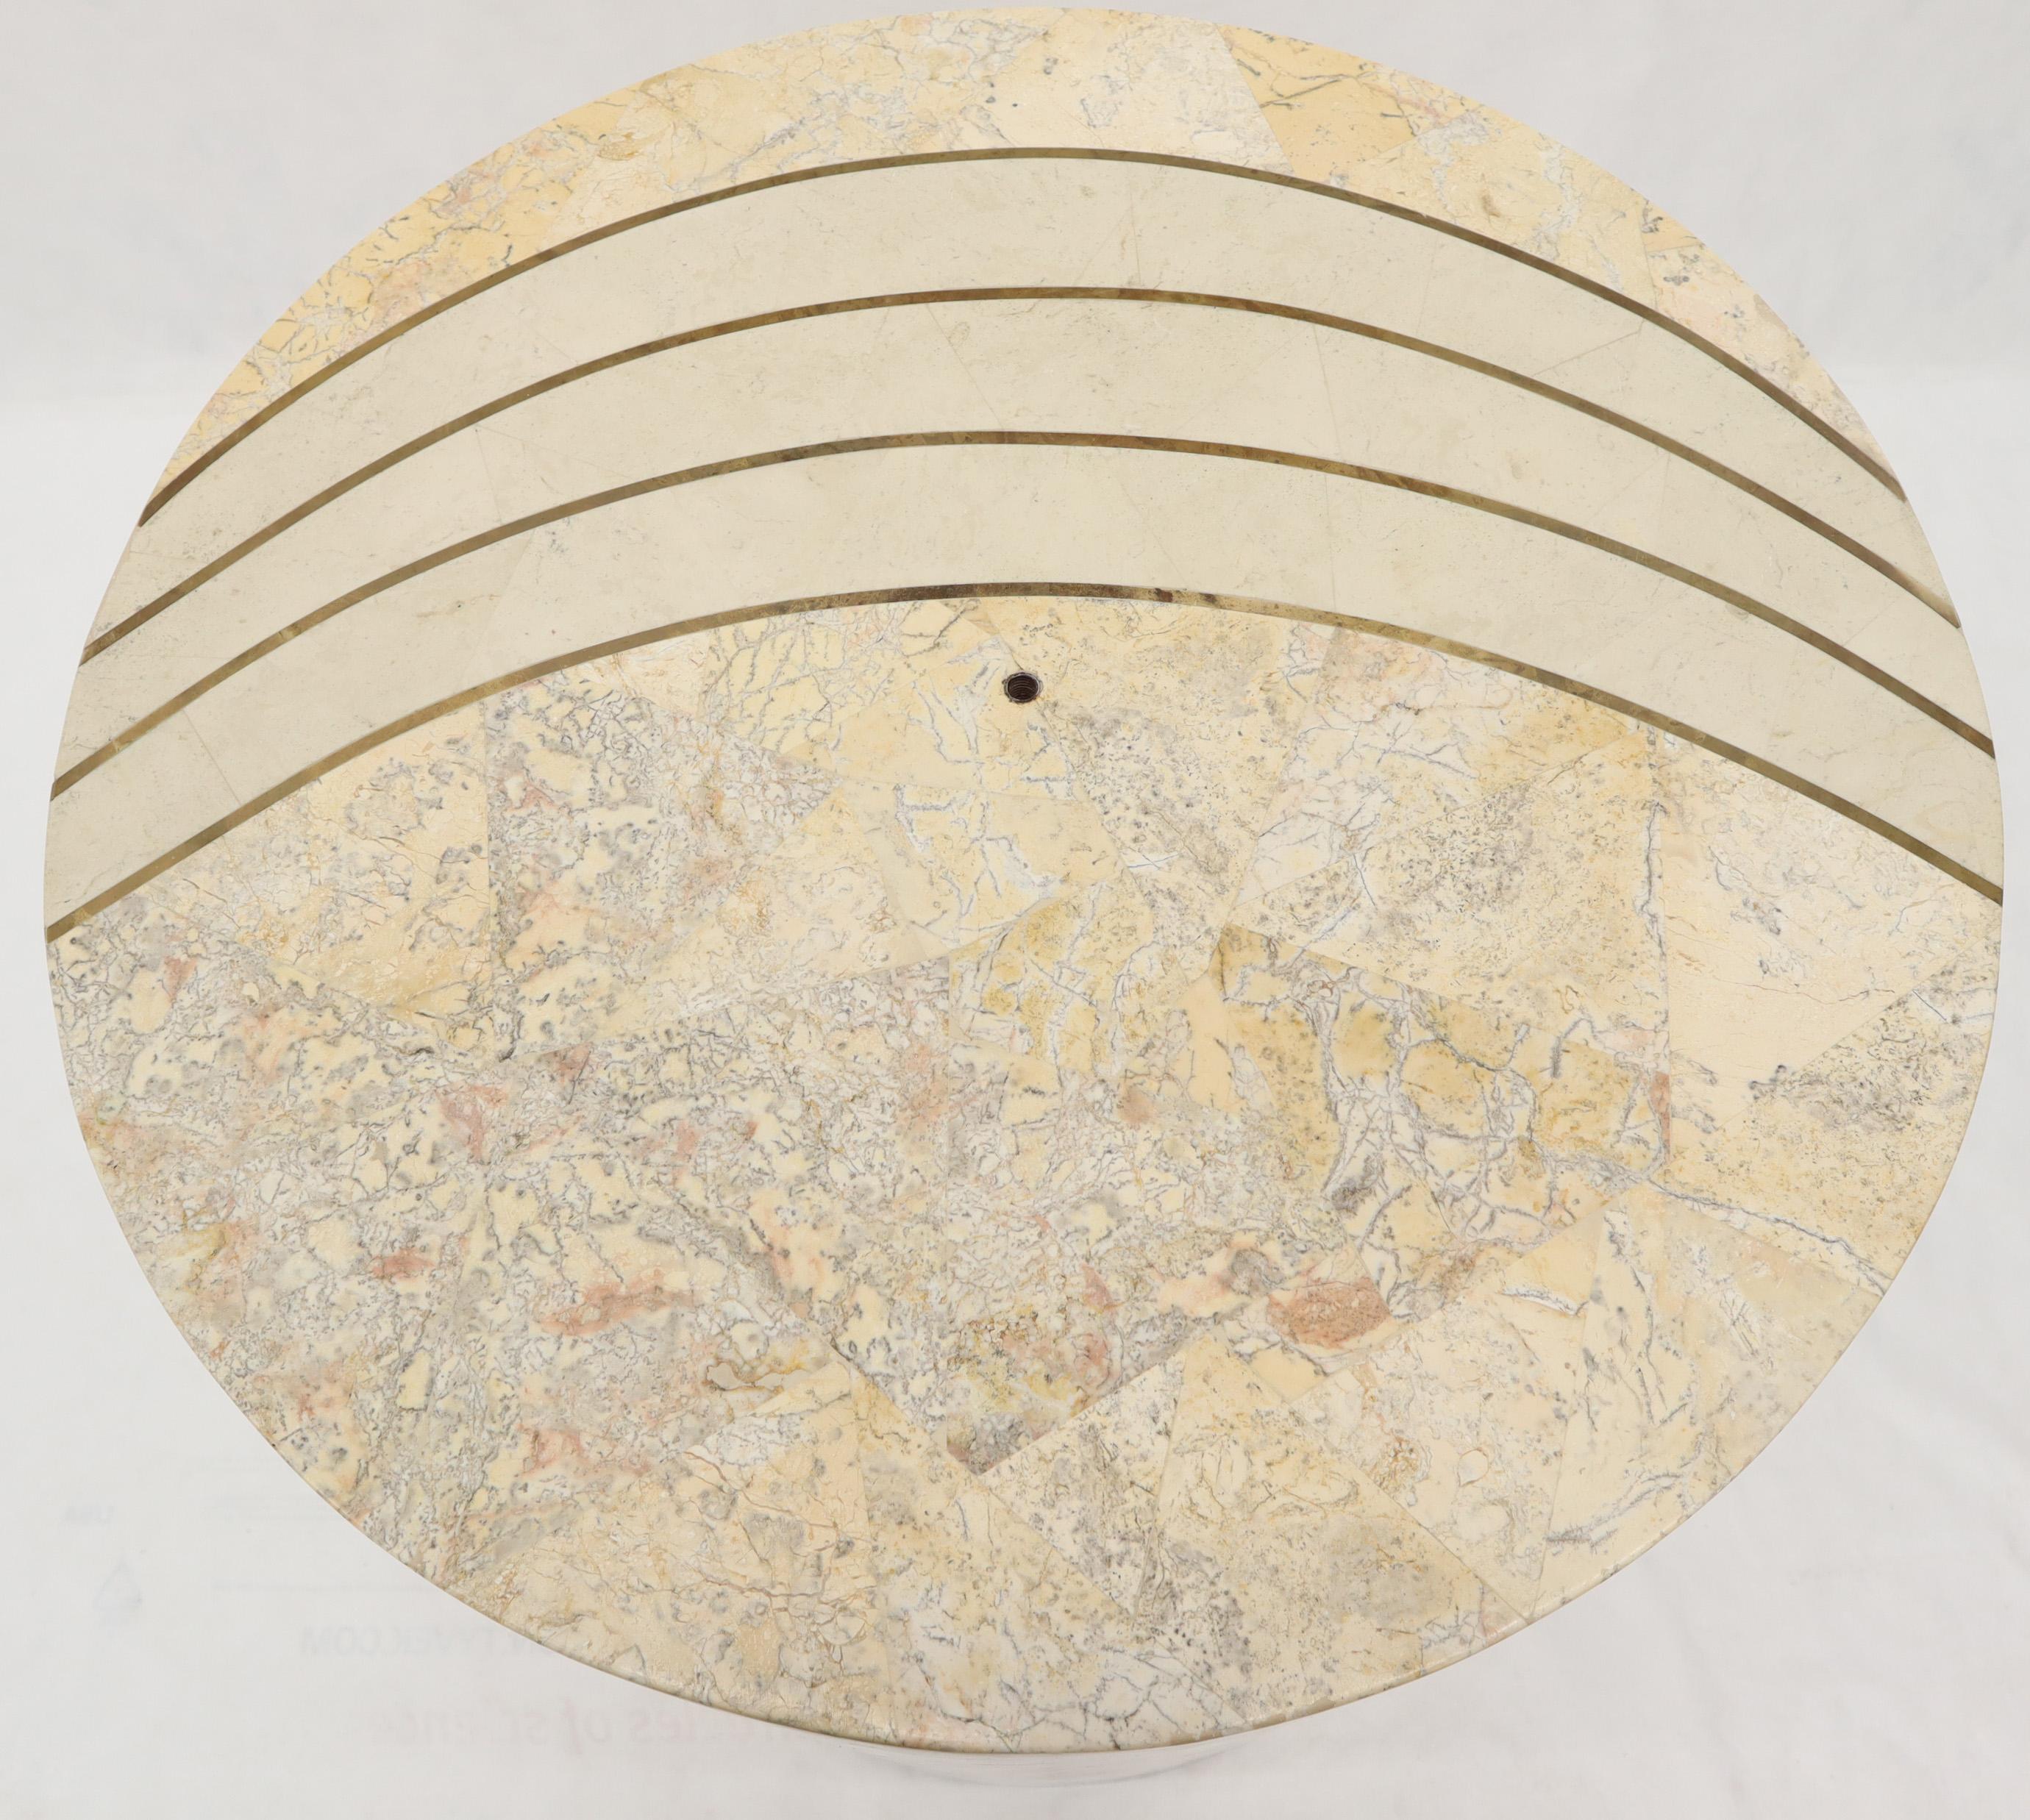 Large Cylinder Tessellated Stone Veneer Brass Inlay Dining Table Base Pedestal In Excellent Condition For Sale In Rockaway, NJ